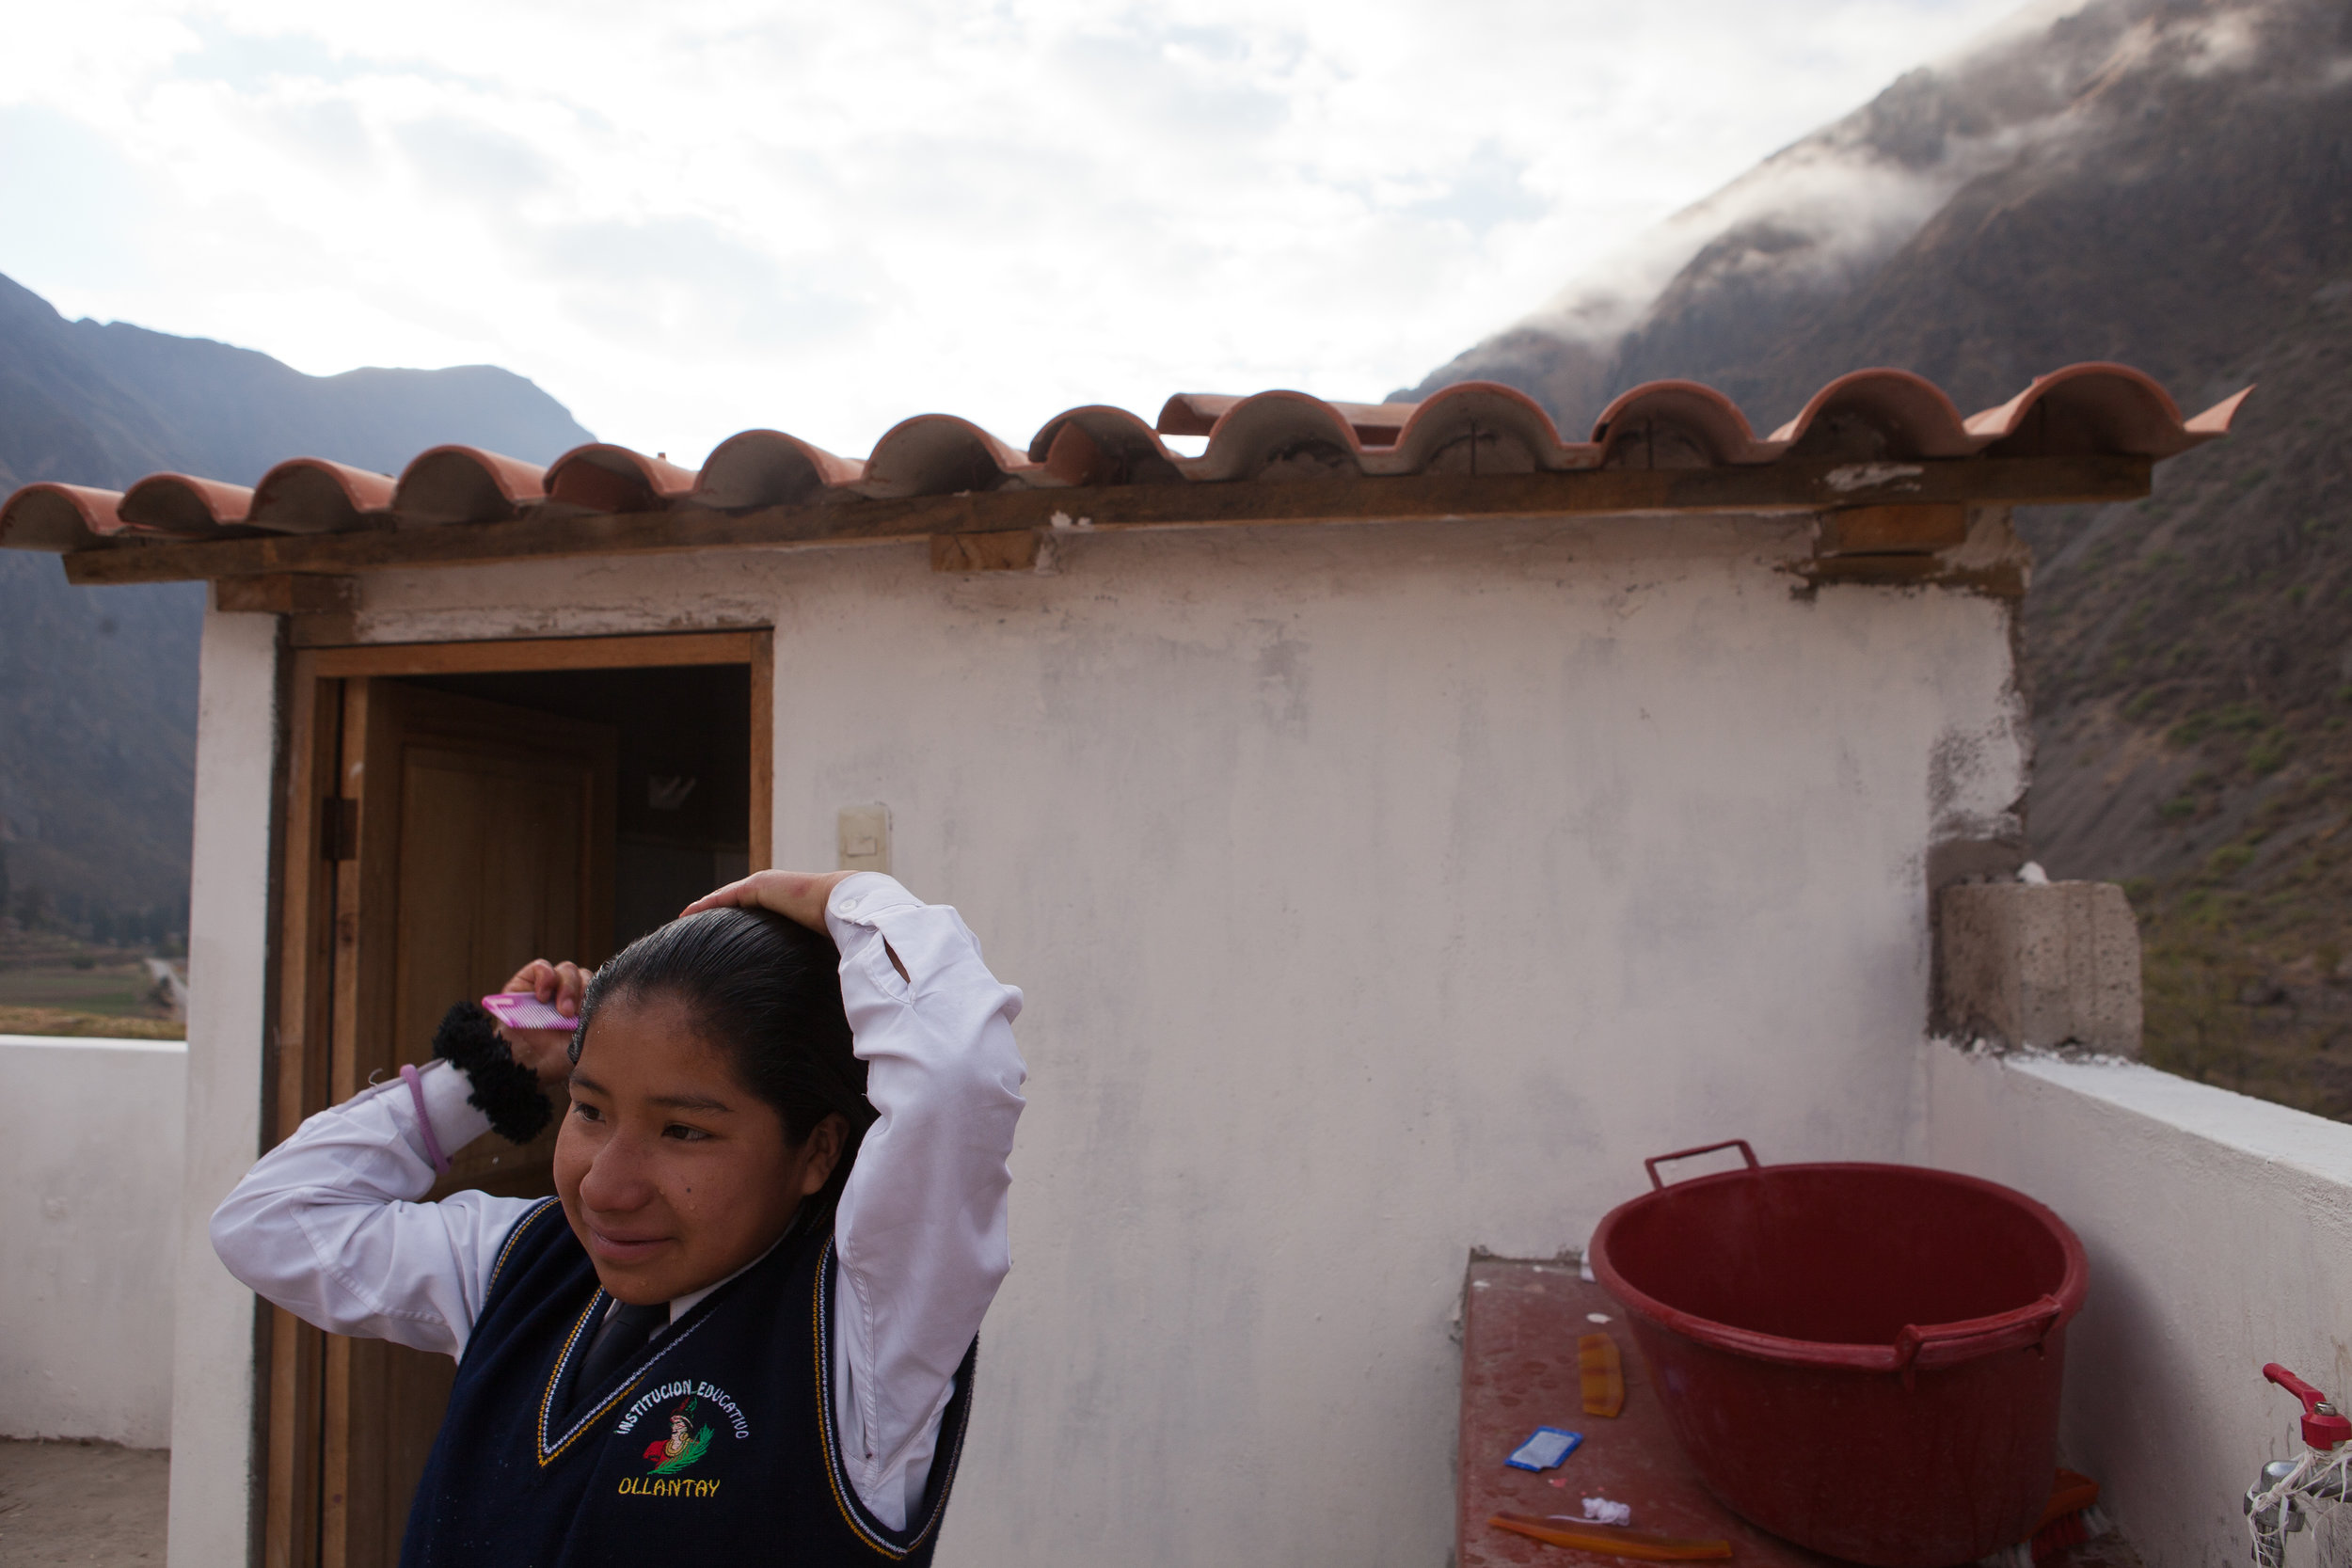  5:30am: Elizabeth wakes up and starts her day. Here, she combs her hair outside the dormitory's upstairs bathroom. The fifteen girls manage to split two bathrooms among all of them! All of the girls' basic needs are supplied by the Sacred Valley Pro